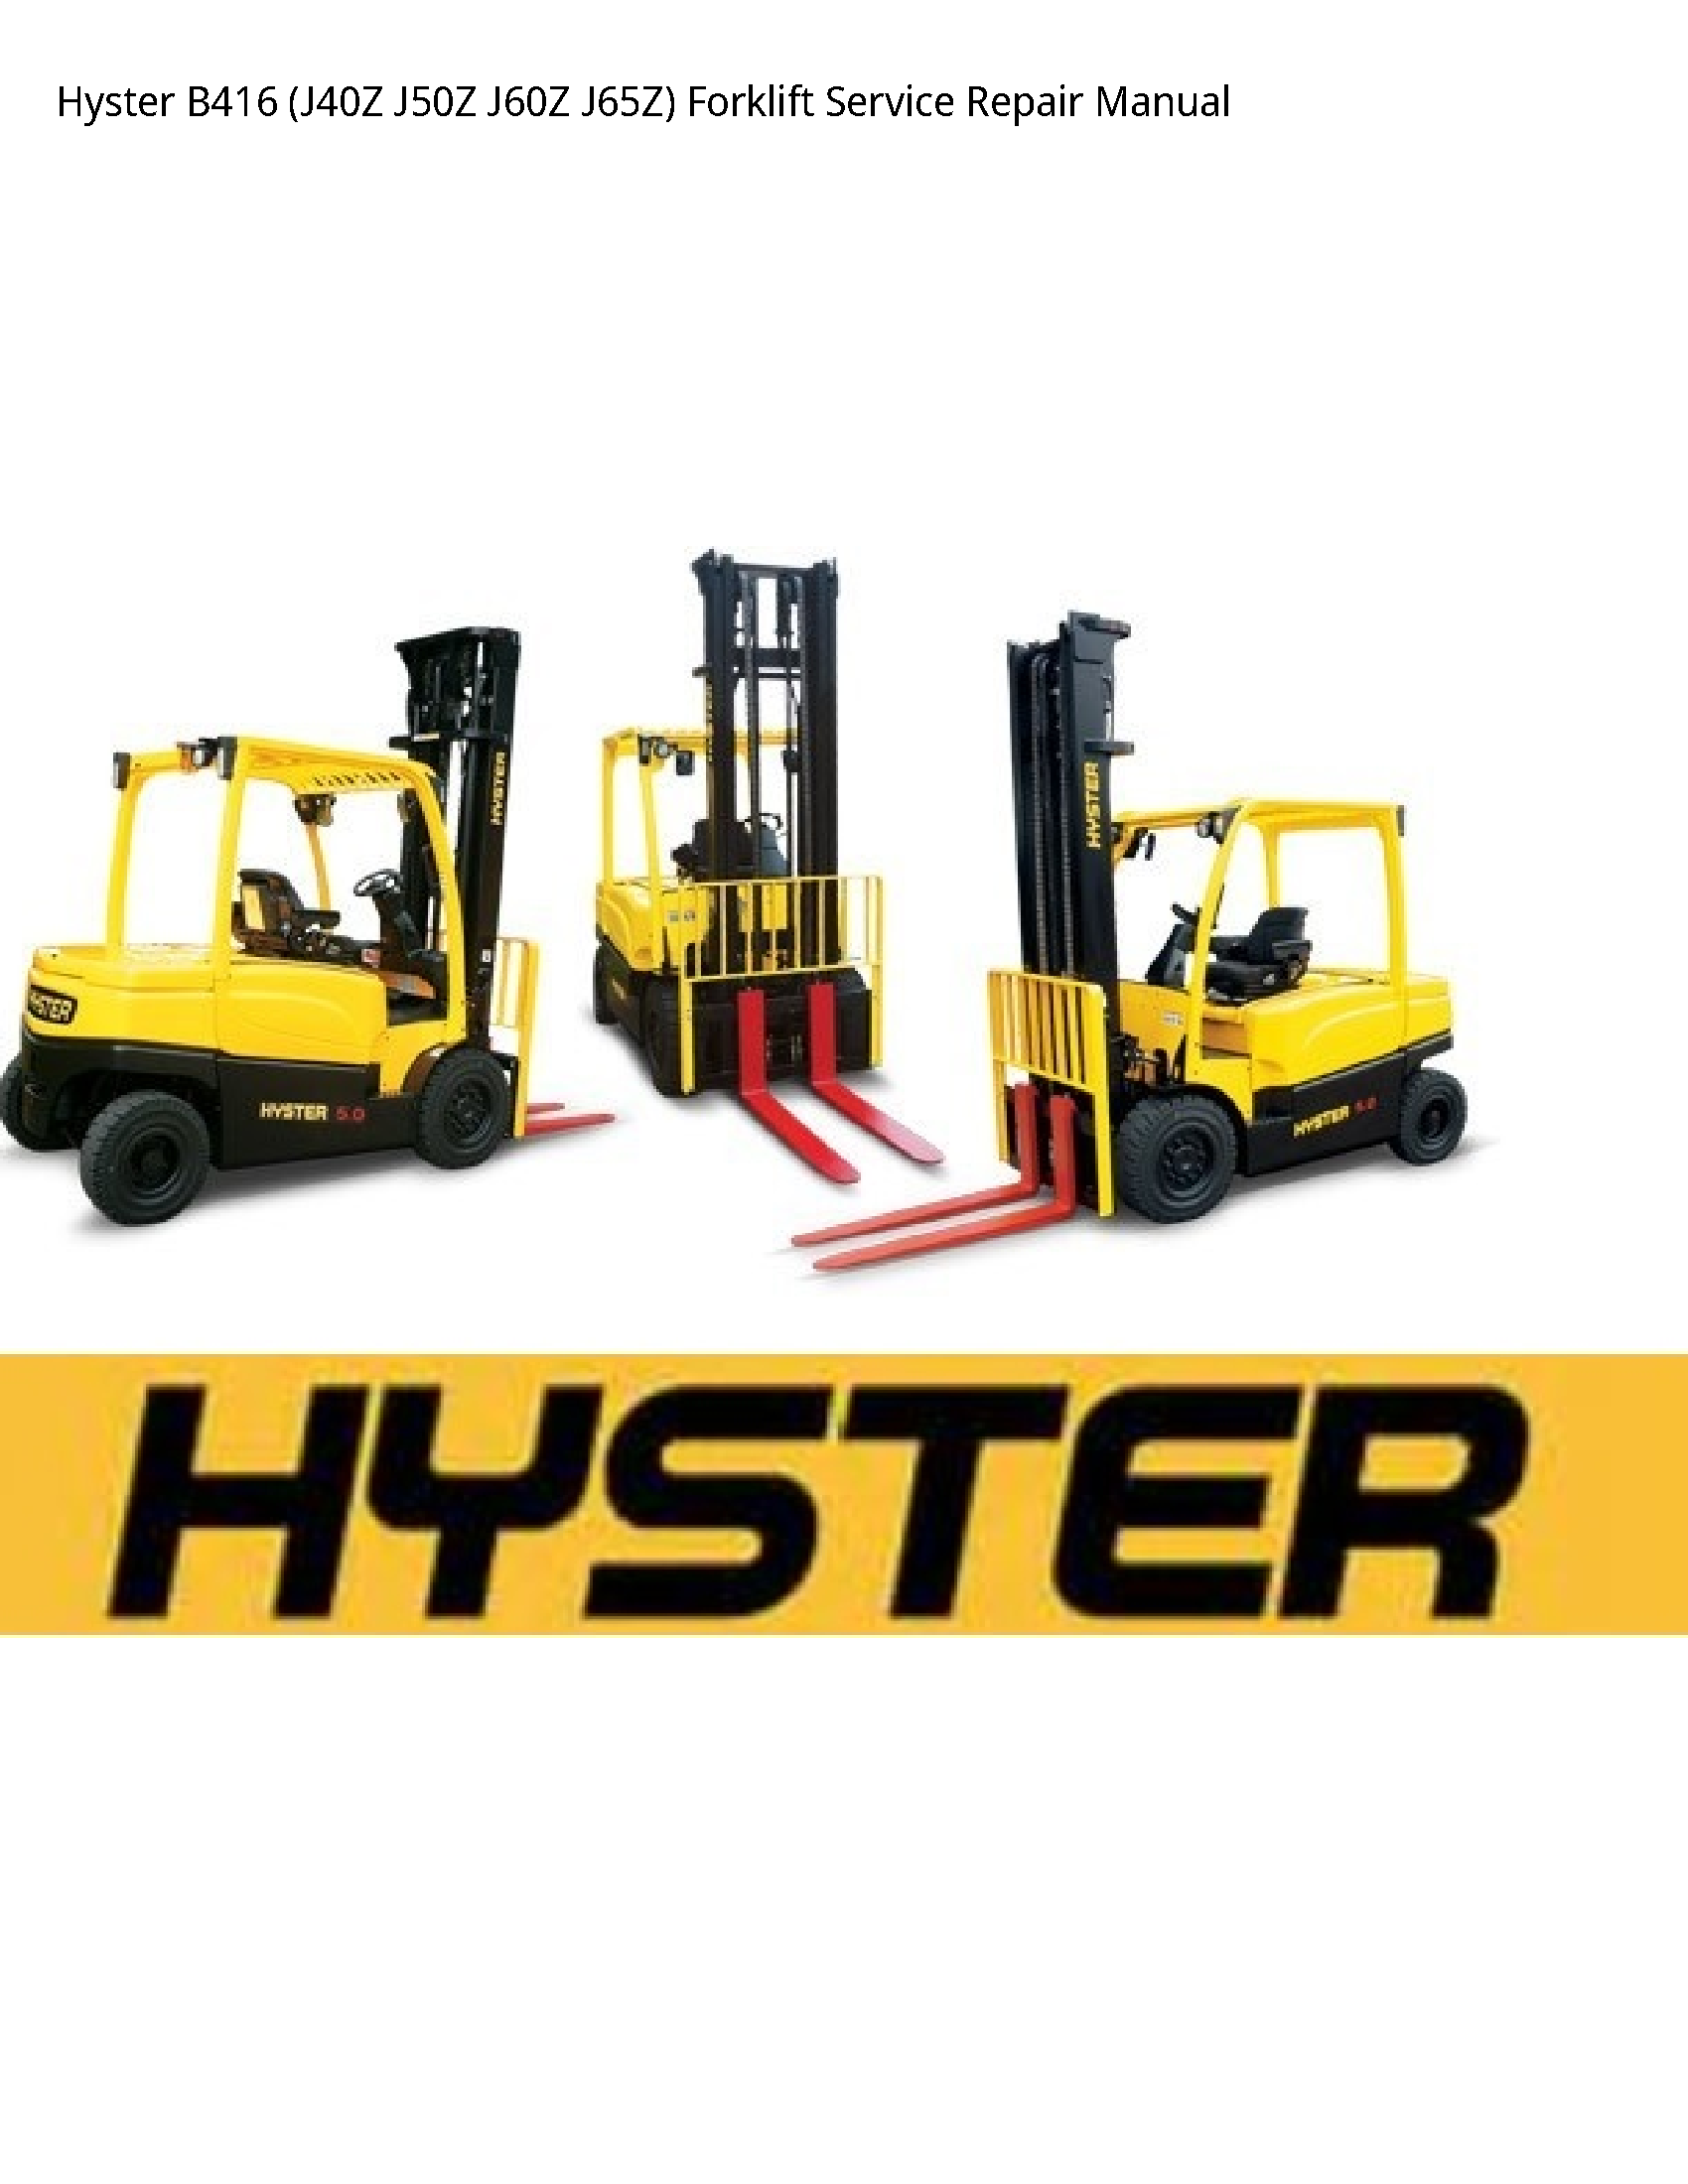 Hyster B416 Forklift manual